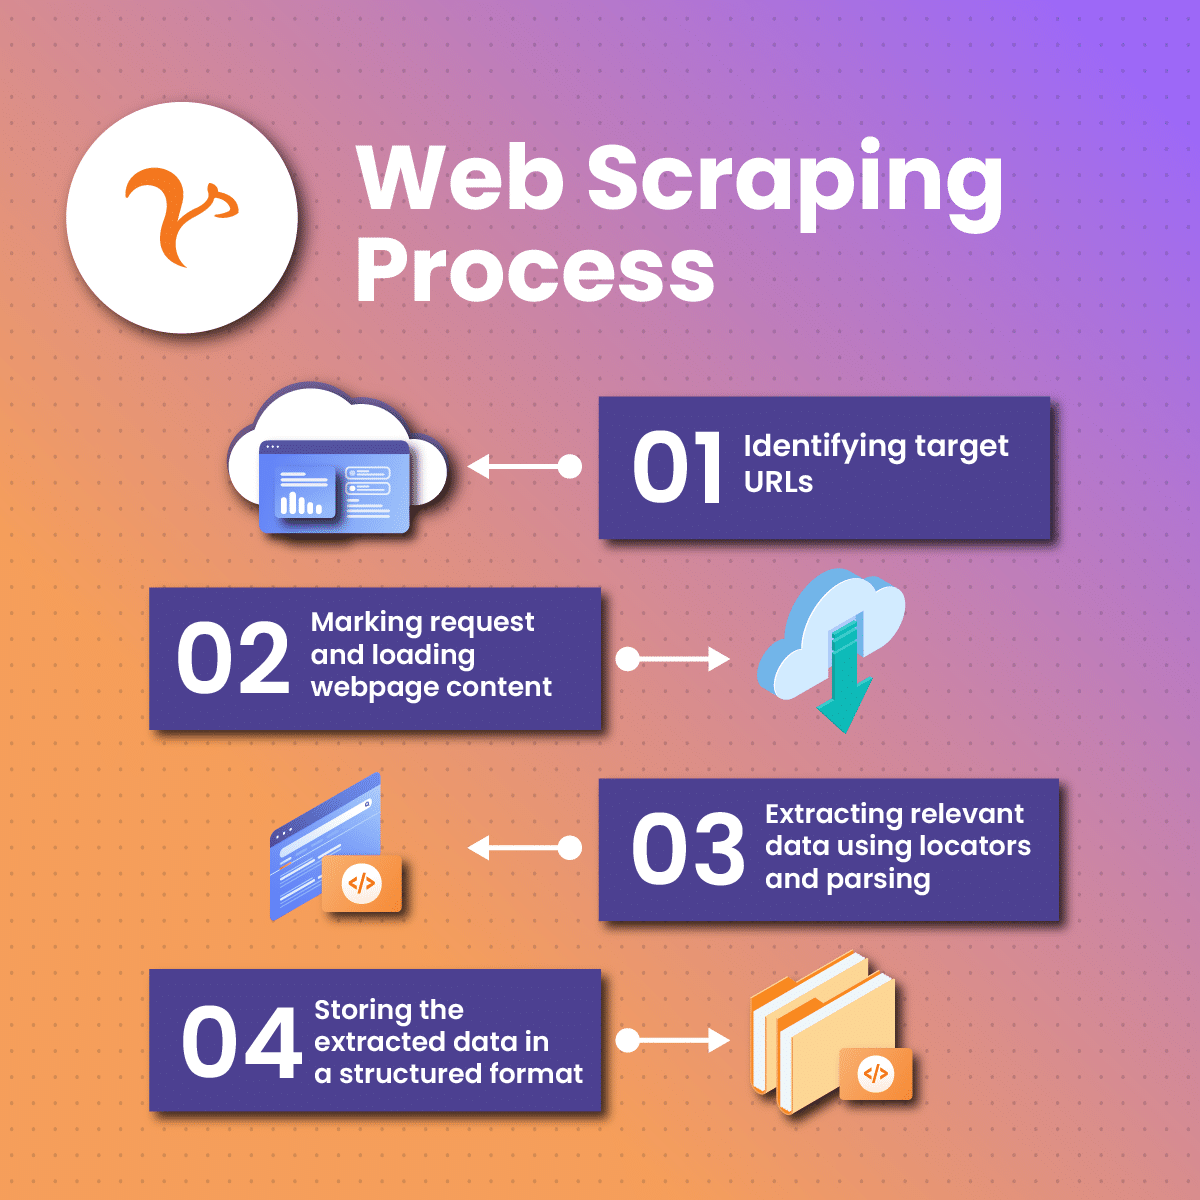 How does Web Scraping work?